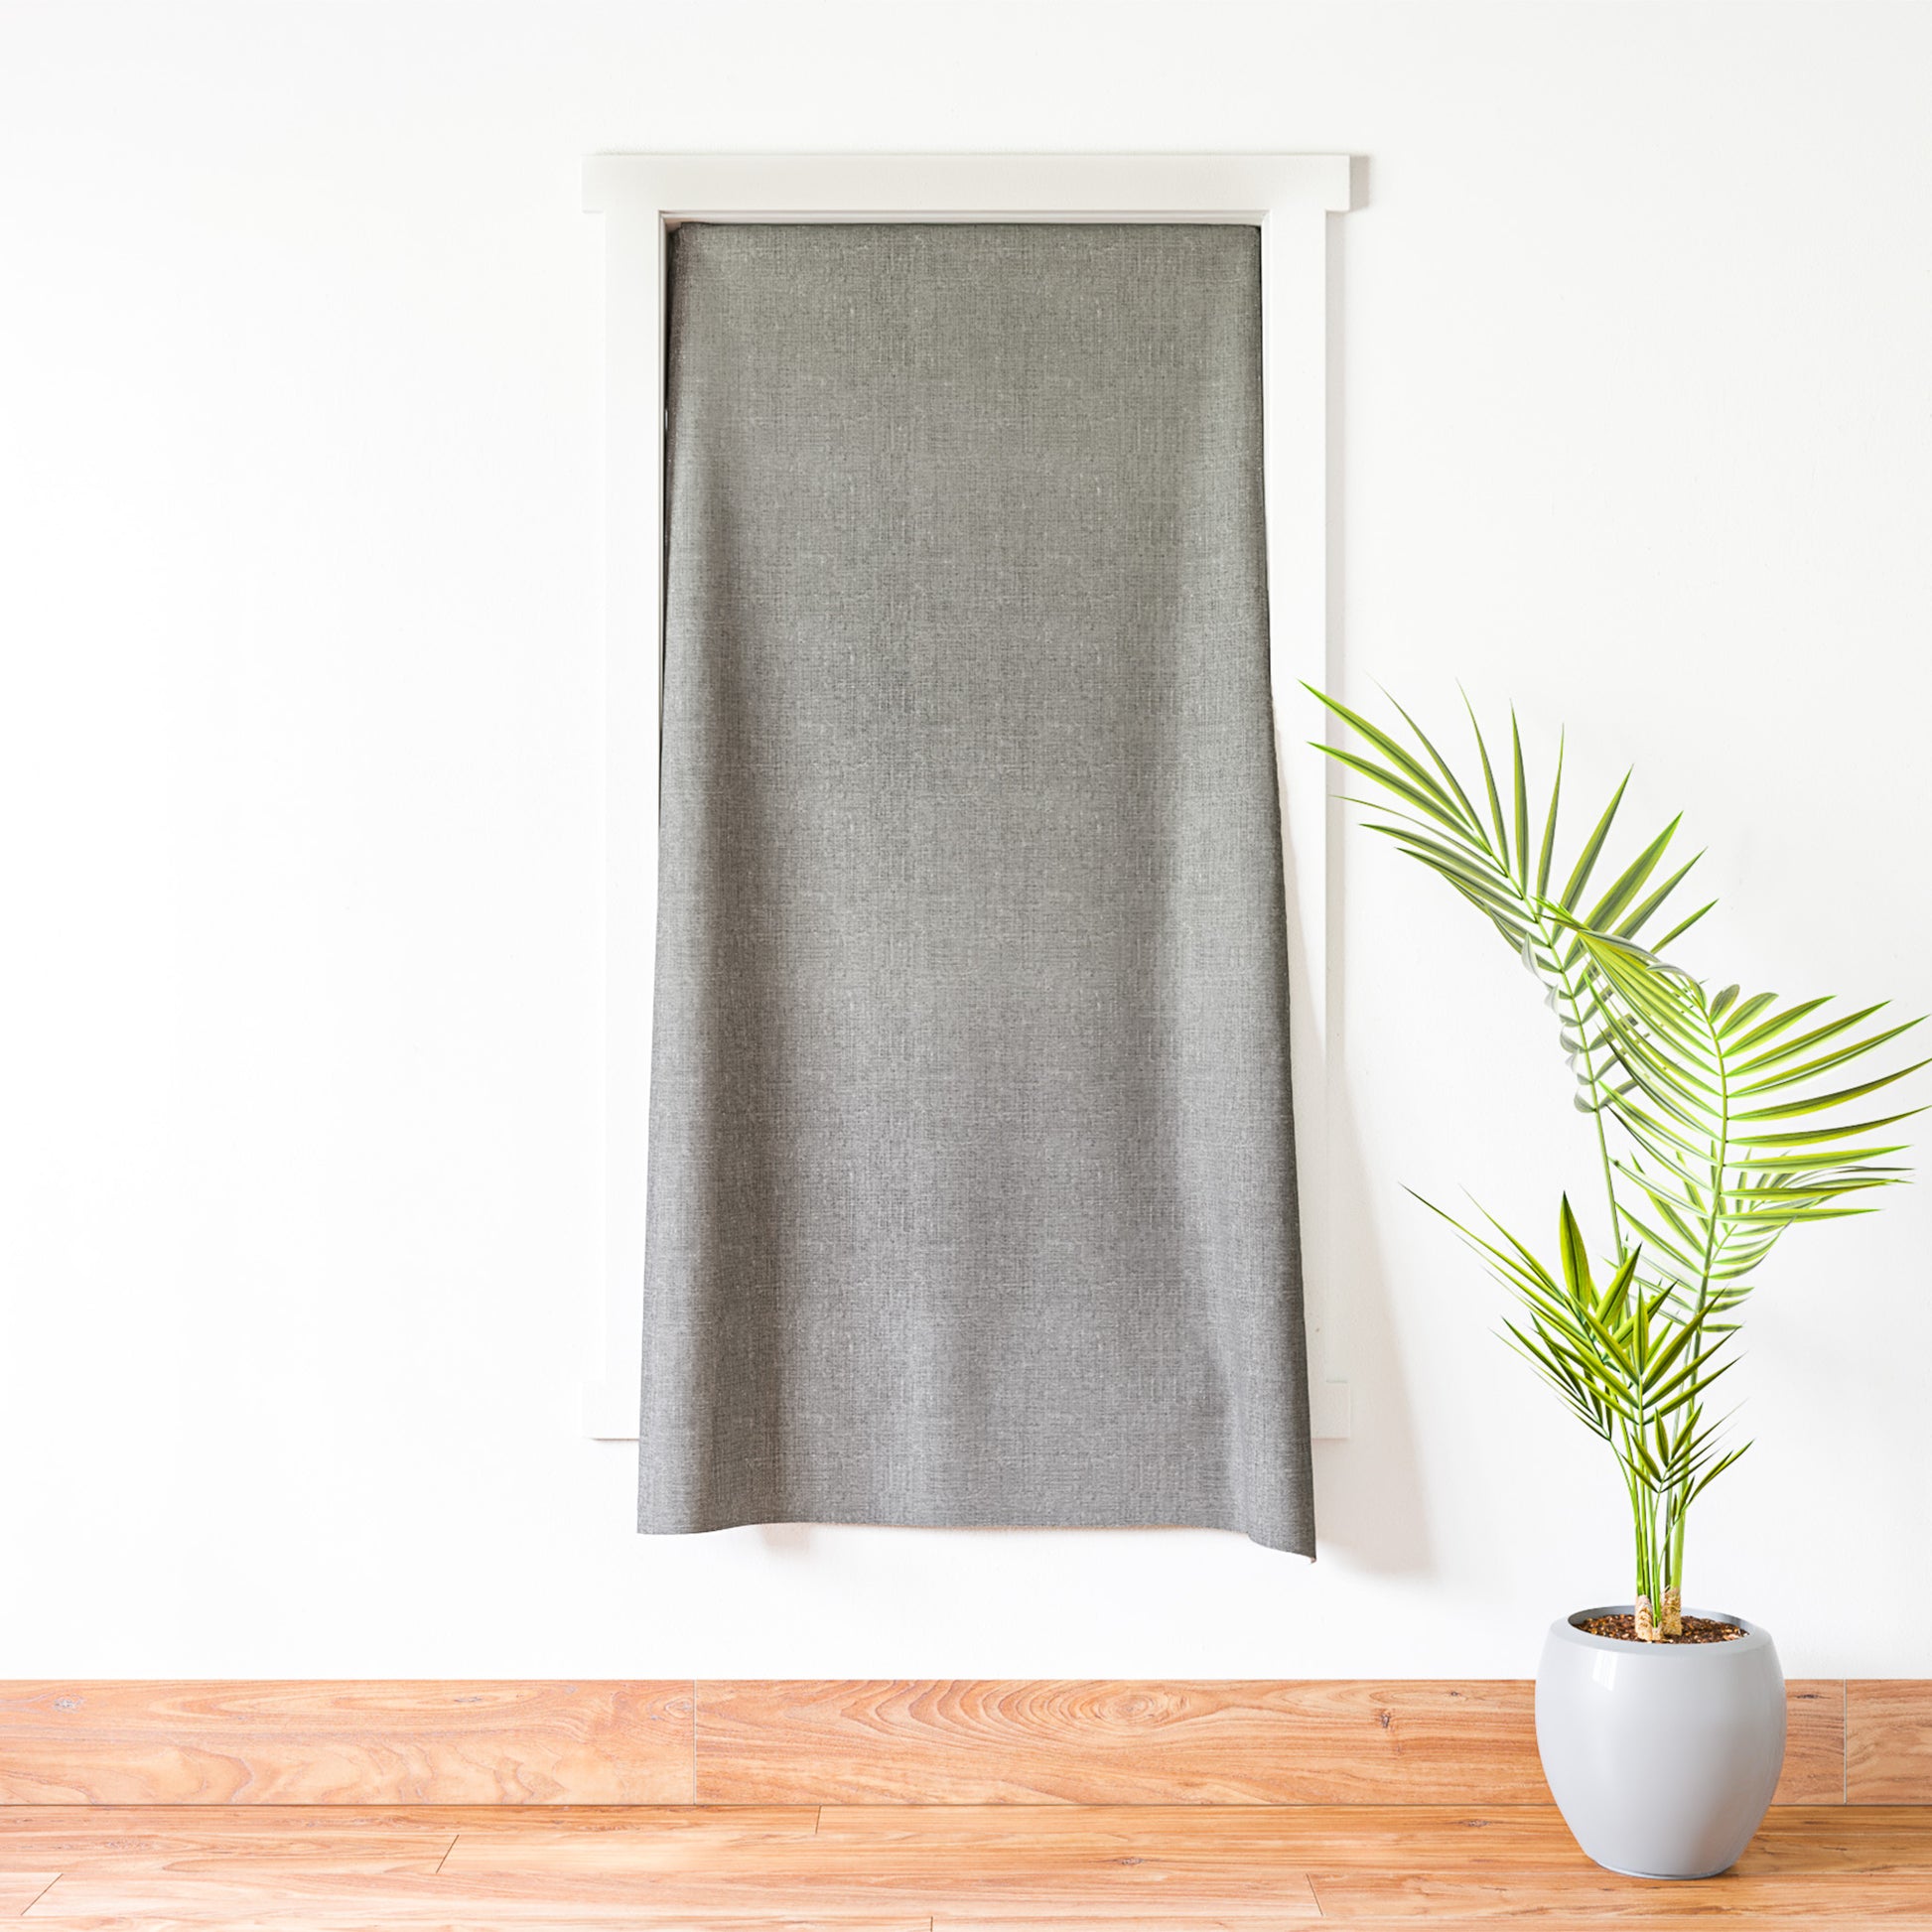 5 Sustainable Blackout And Privacy Curtains For Deeper Sleep - The Good  Trade